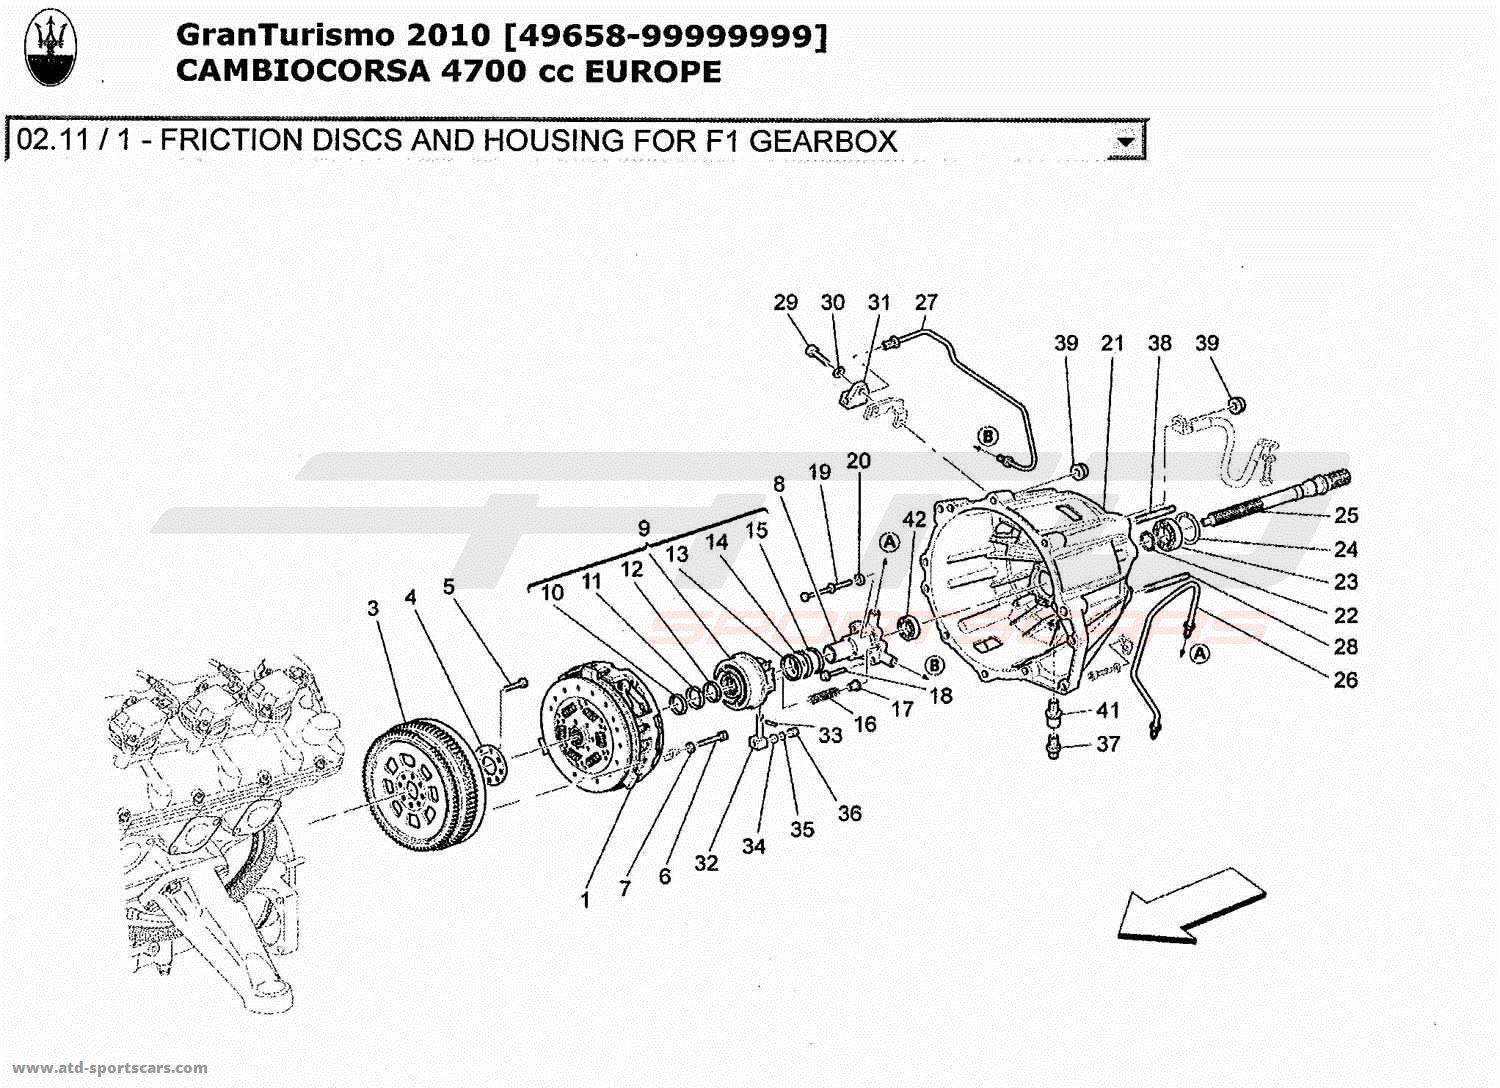 FRICTION DISCS AND HOUSING FOR F1 GEARBOX